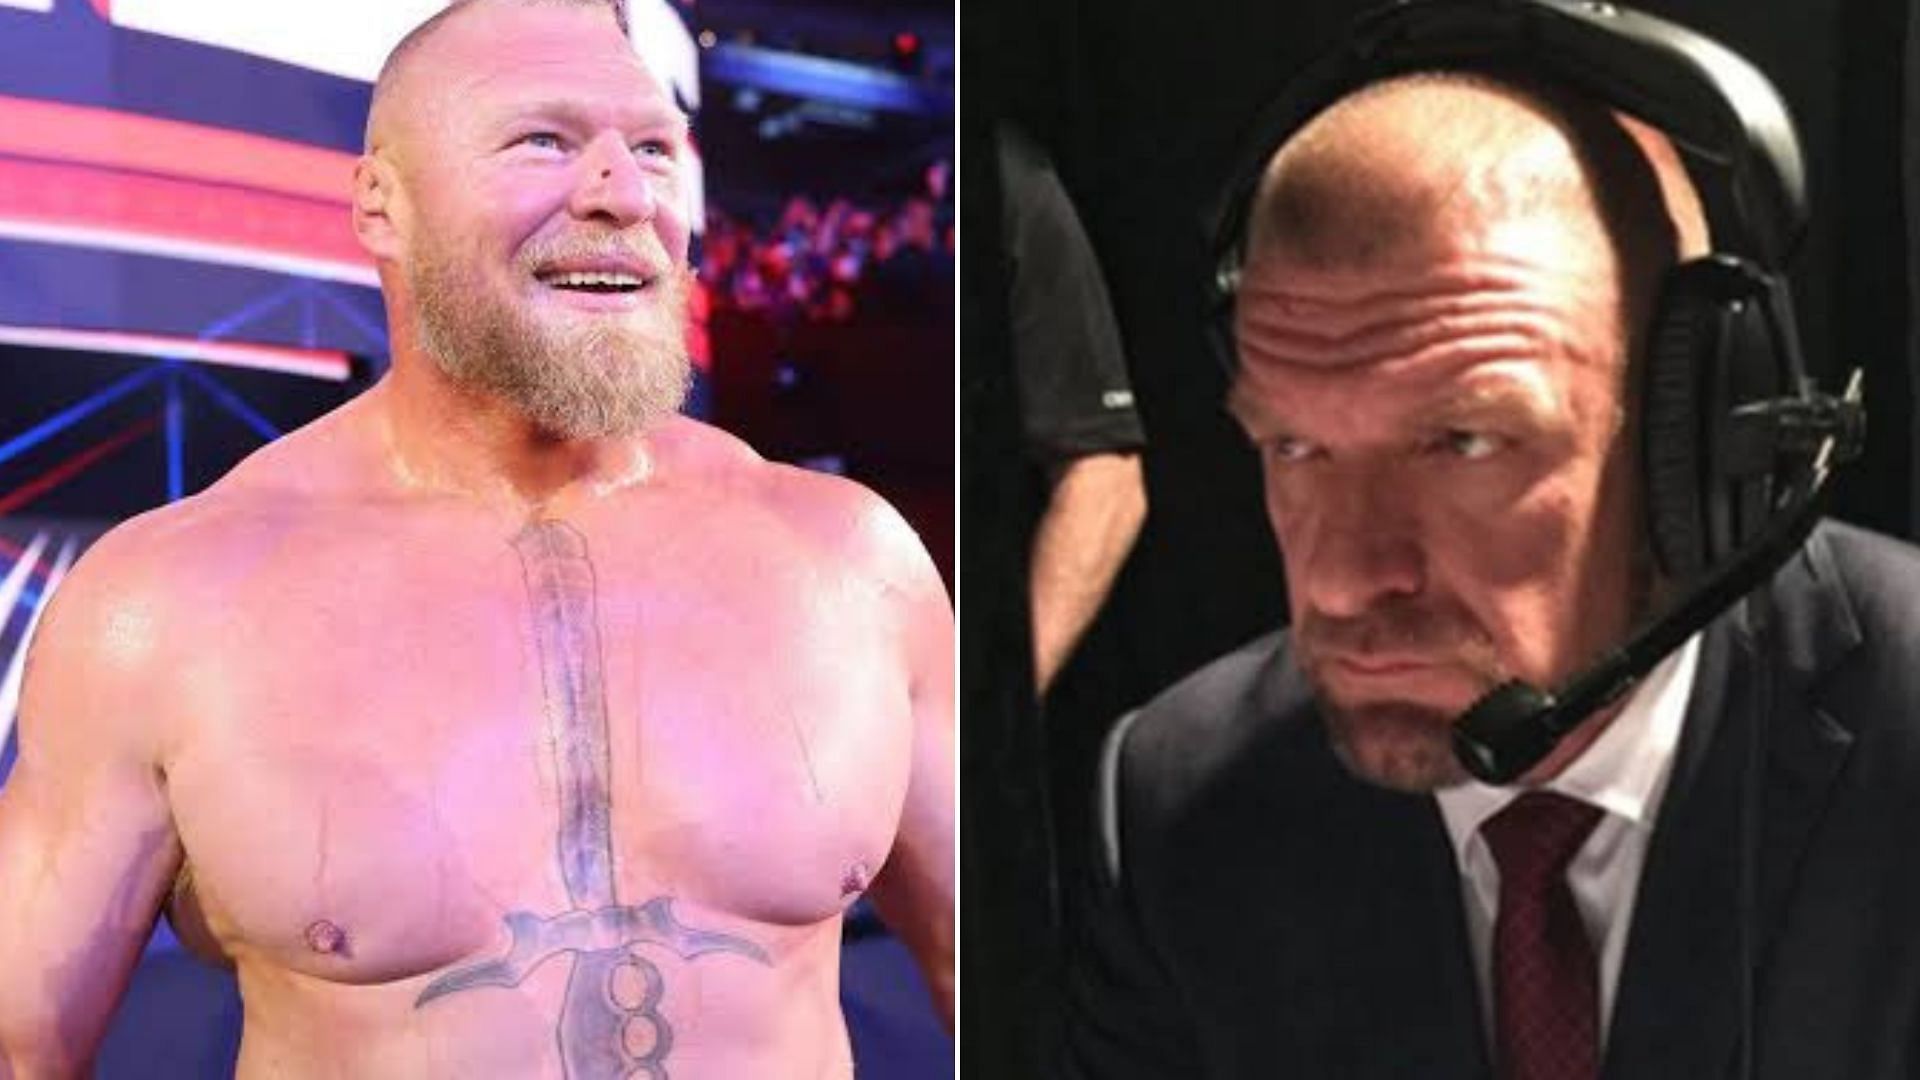 Could HHH make this Brock Lesnar dream match possible?